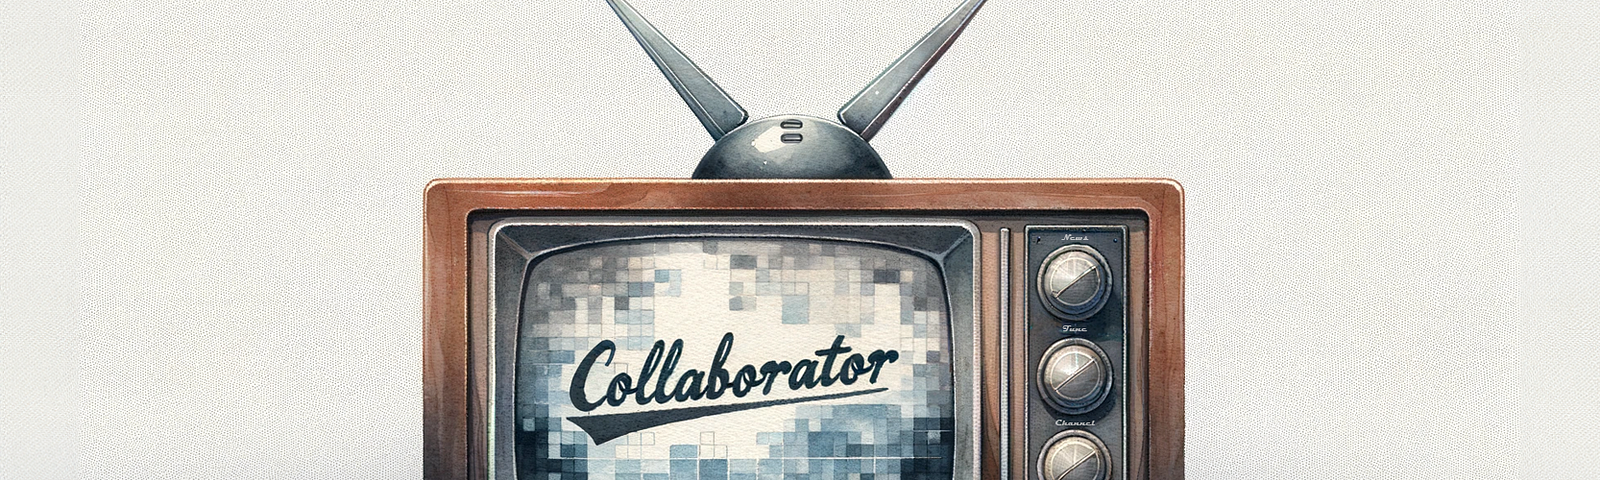 Artistic representation of an old-fashioned television on a subtle background. The TV has a ‘Center for Cooperative Media’ logo at the bottom. Its screen prominently features the word ‘Collaborator’ in stylized cursive against a pixelated backdrop. This vintage model includes rabbit ear antennas and side dials labeled for ‘Tint,’ ‘Color,’ and ‘Channel.’ The illustration may symbolize the collaboration in media or the evolution of media technology.